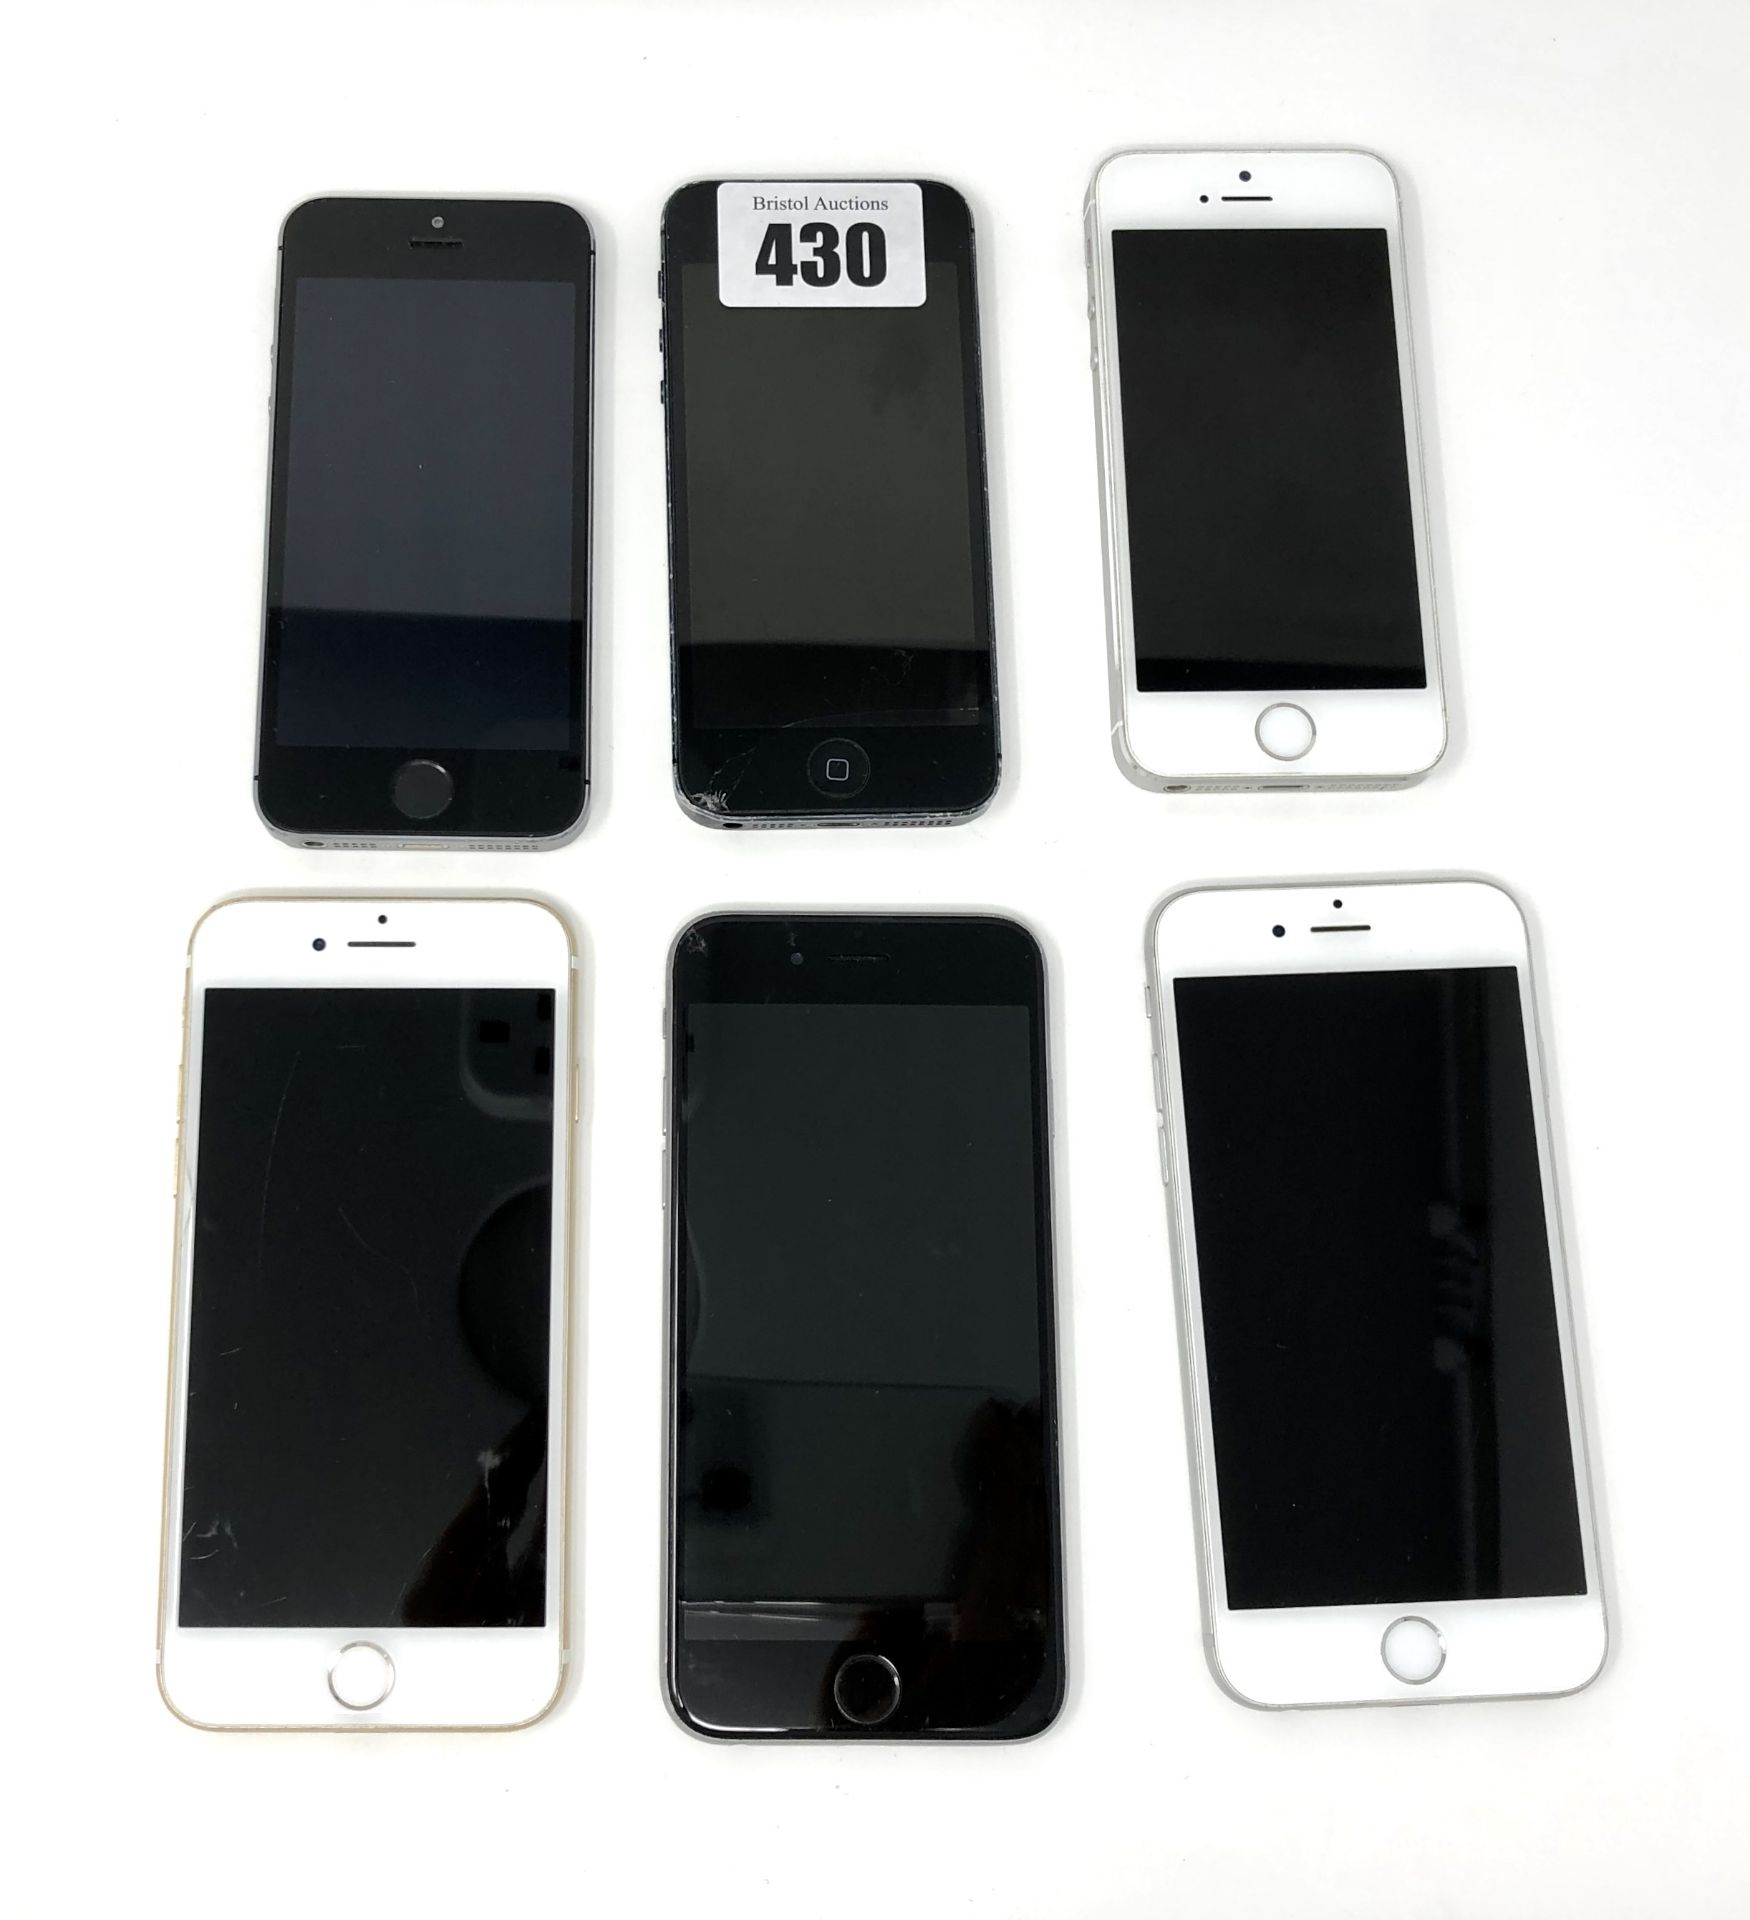 Six pre-owned Apple iPhones sold for parts (All iCloud activation locked); an iPhone 7 (AT&T/T-